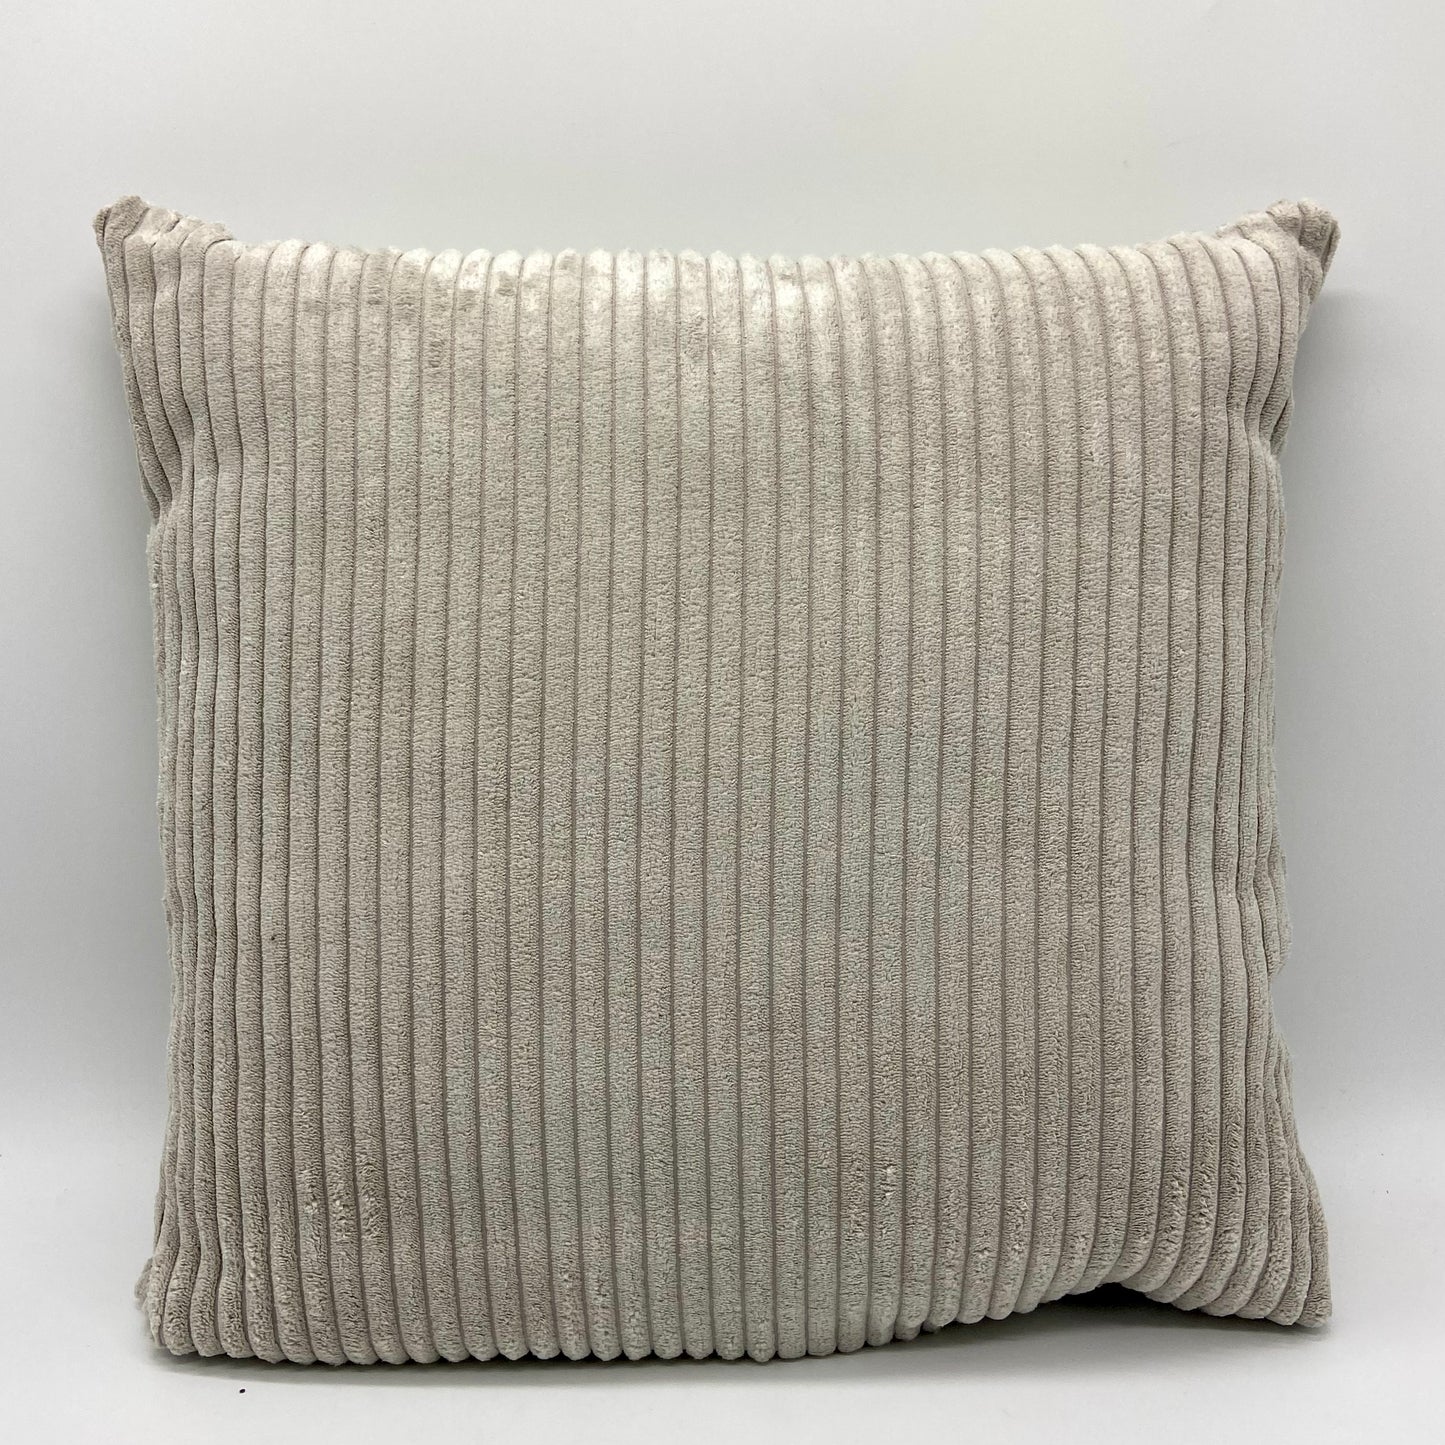 The vintage collection - Velvet cushions